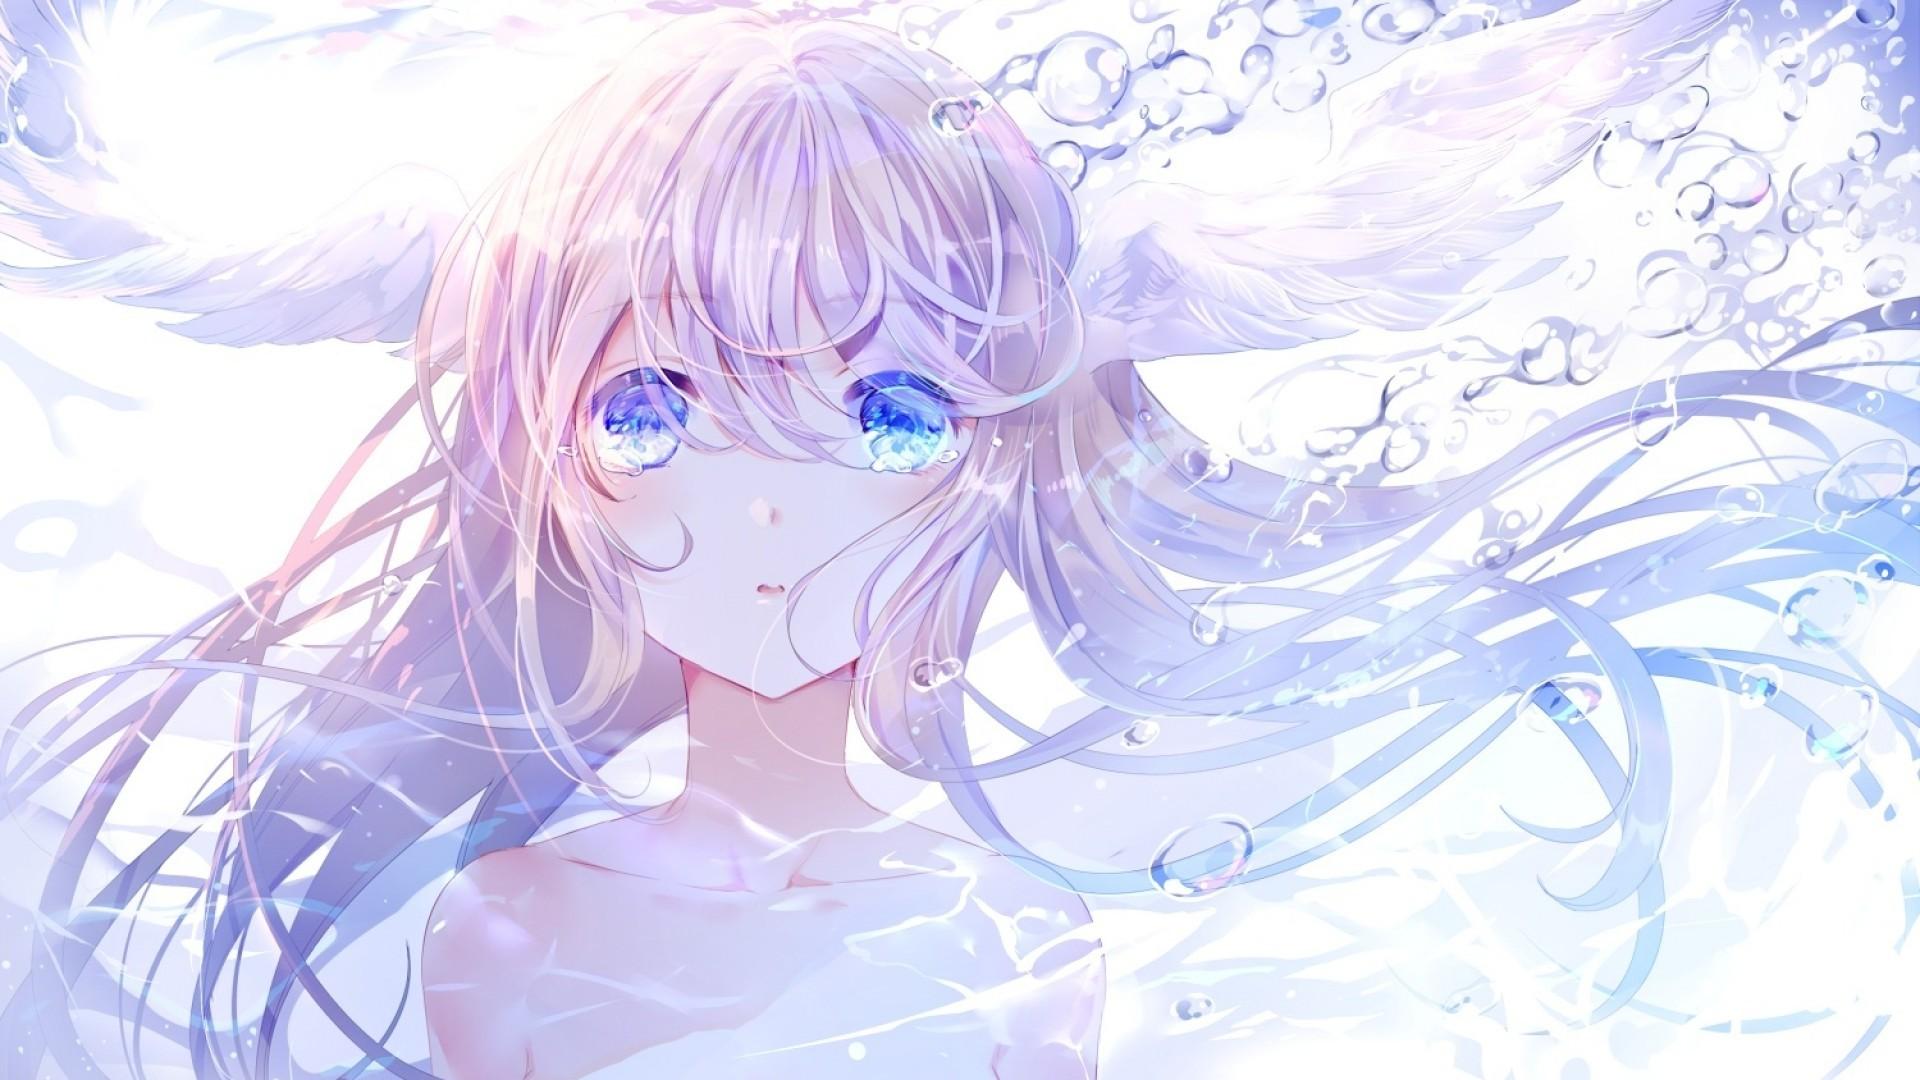 Download 1920x1080 Anime Girl, Crying .wallpapermaiden.com